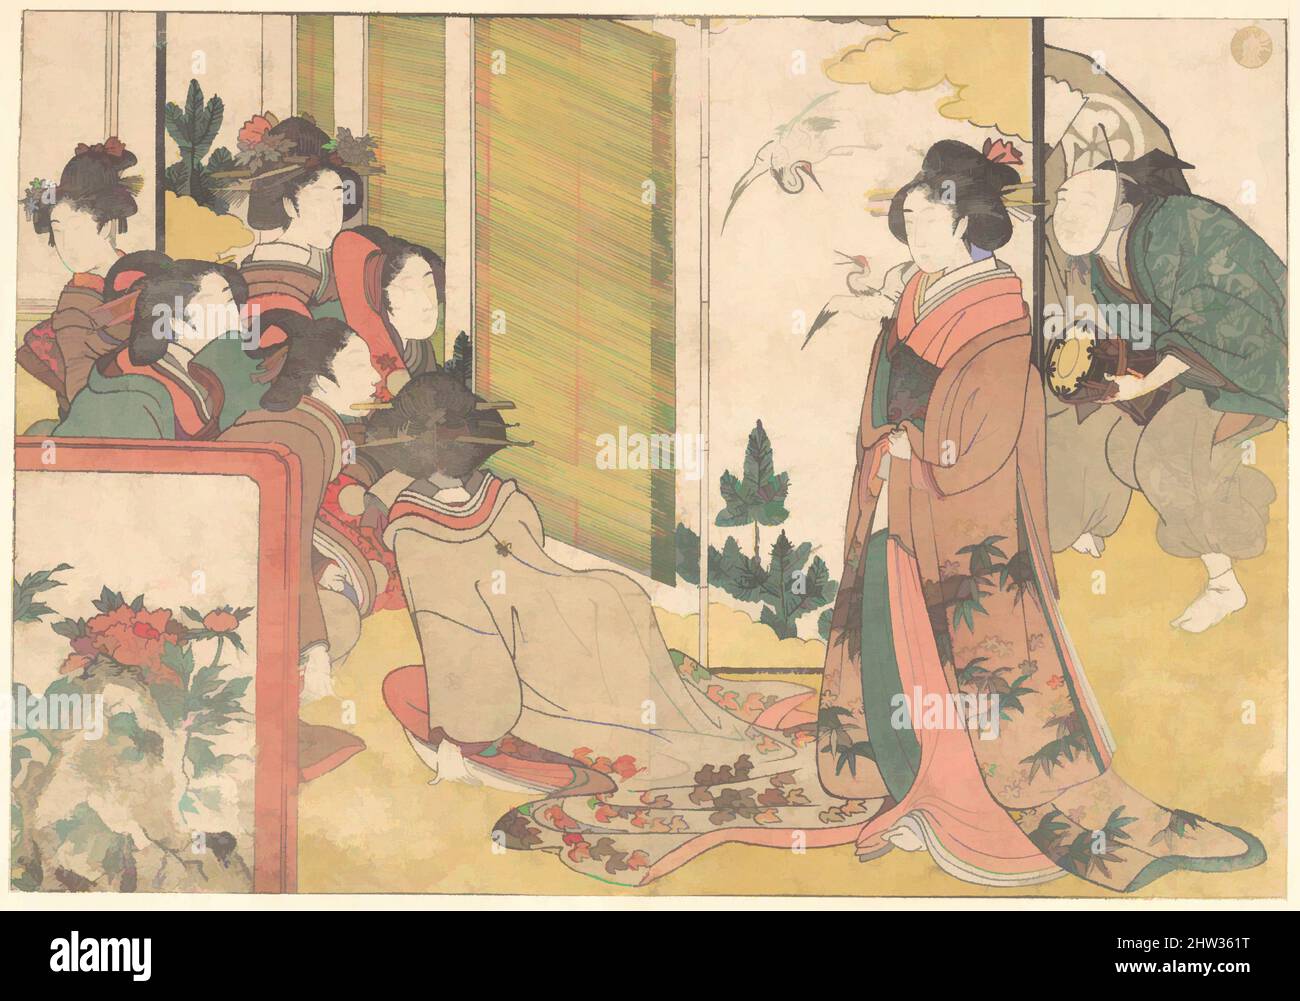 Art inspired by 四季の花, Girls Entertained by Performers, from the illustrated book Flowers of the Four Seasons, Edo period (1615–1868), 1801, Japan, Polychrome woodblock print; ink and color on paper, 6 7/8 x 9 7/8 in. (17.5 x 25.1 cm), Prints, Kitagawa Utamaro (Japanese, 1753?–1806, Classic works modernized by Artotop with a splash of modernity. Shapes, color and value, eye-catching visual impact on art. Emotions through freedom of artworks in a contemporary way. A timeless message pursuing a wildly creative new direction. Artists turning to the digital medium and creating the Artotop NFT Stock Photo